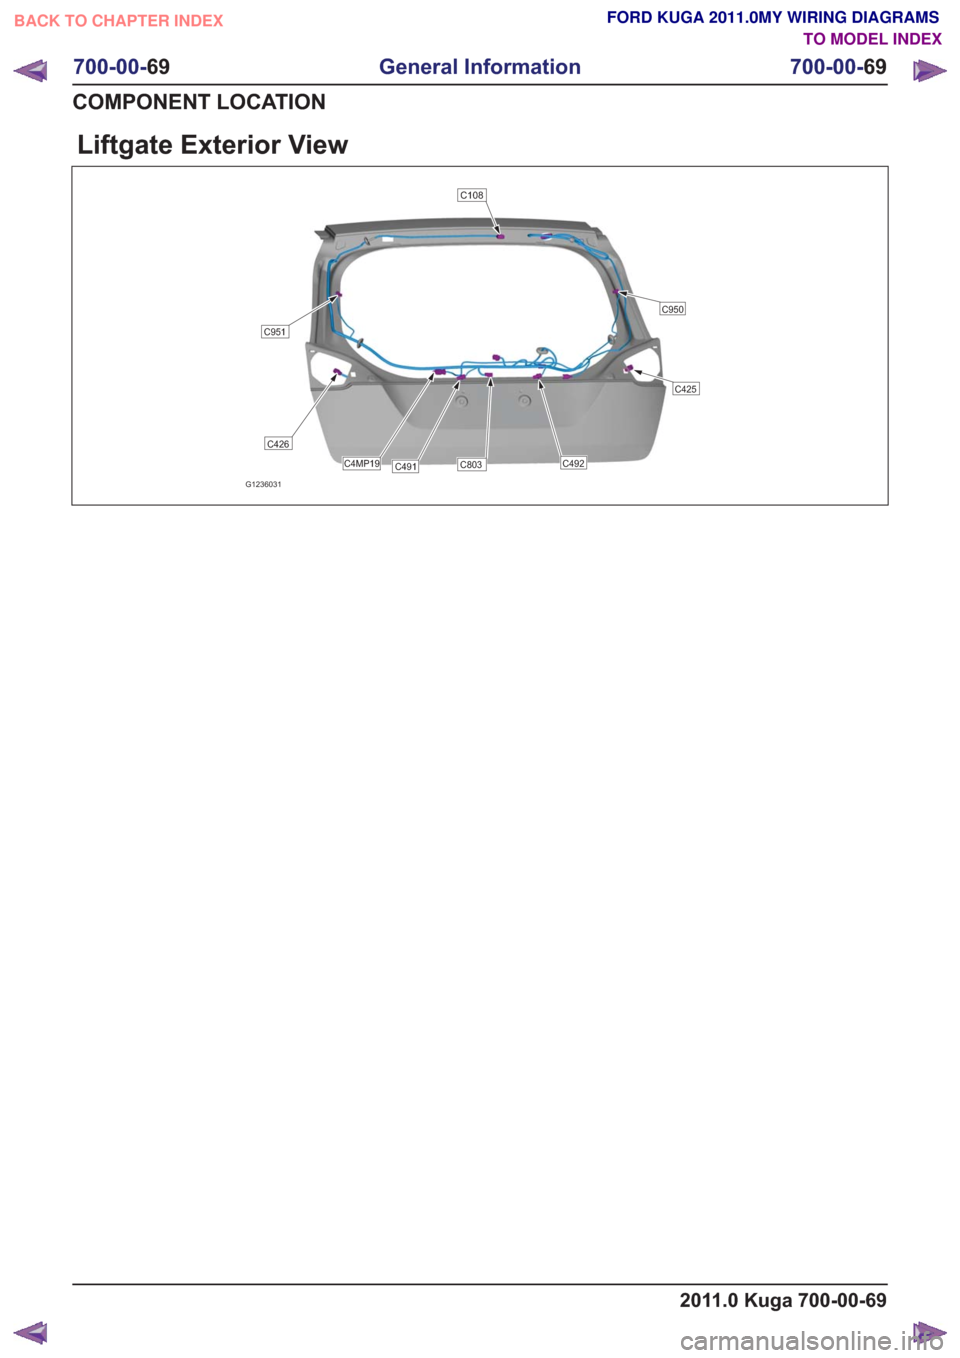 FORD KUGA 2011 1.G Wiring Diagram Workshop Manual Liftgate Exterior View
G1236031
C950
C425
C492C803C491
C426
C951
C108
C4MP19
2011.0 Kuga 700-00-69
700-00-69
General Information
700-00- 69
COMPONENT LOCATION
BACK TO CHAPTER INDEX TO MODEL INDEXFORD 